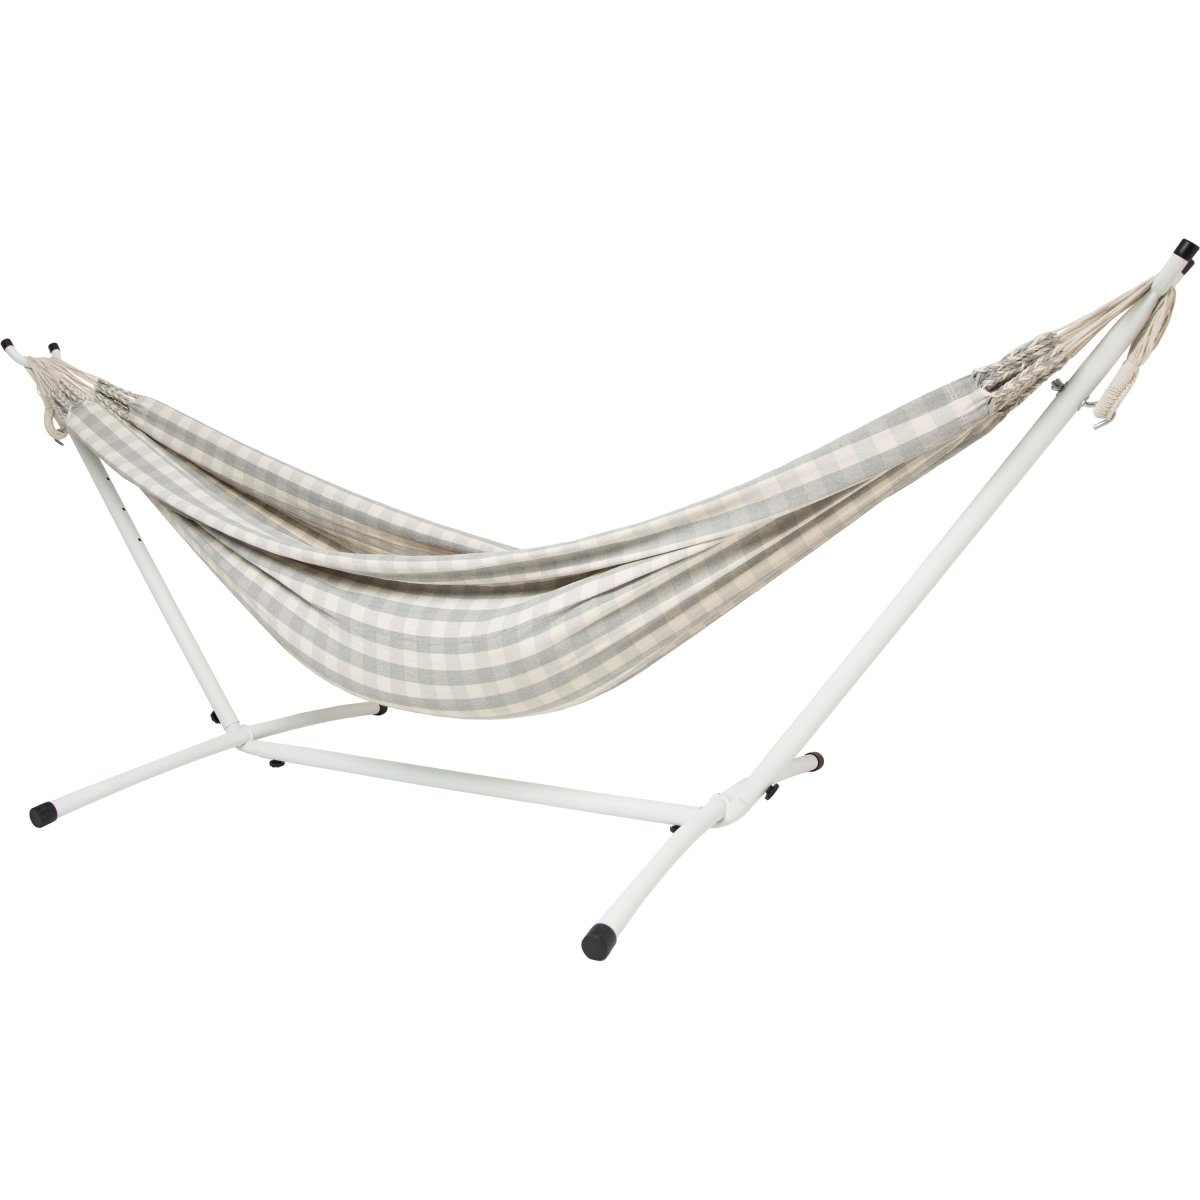 10ft White Universal Steel Hammock Stand &amp; Authentic Double Vichy Hammock in Stone - Outdoorium